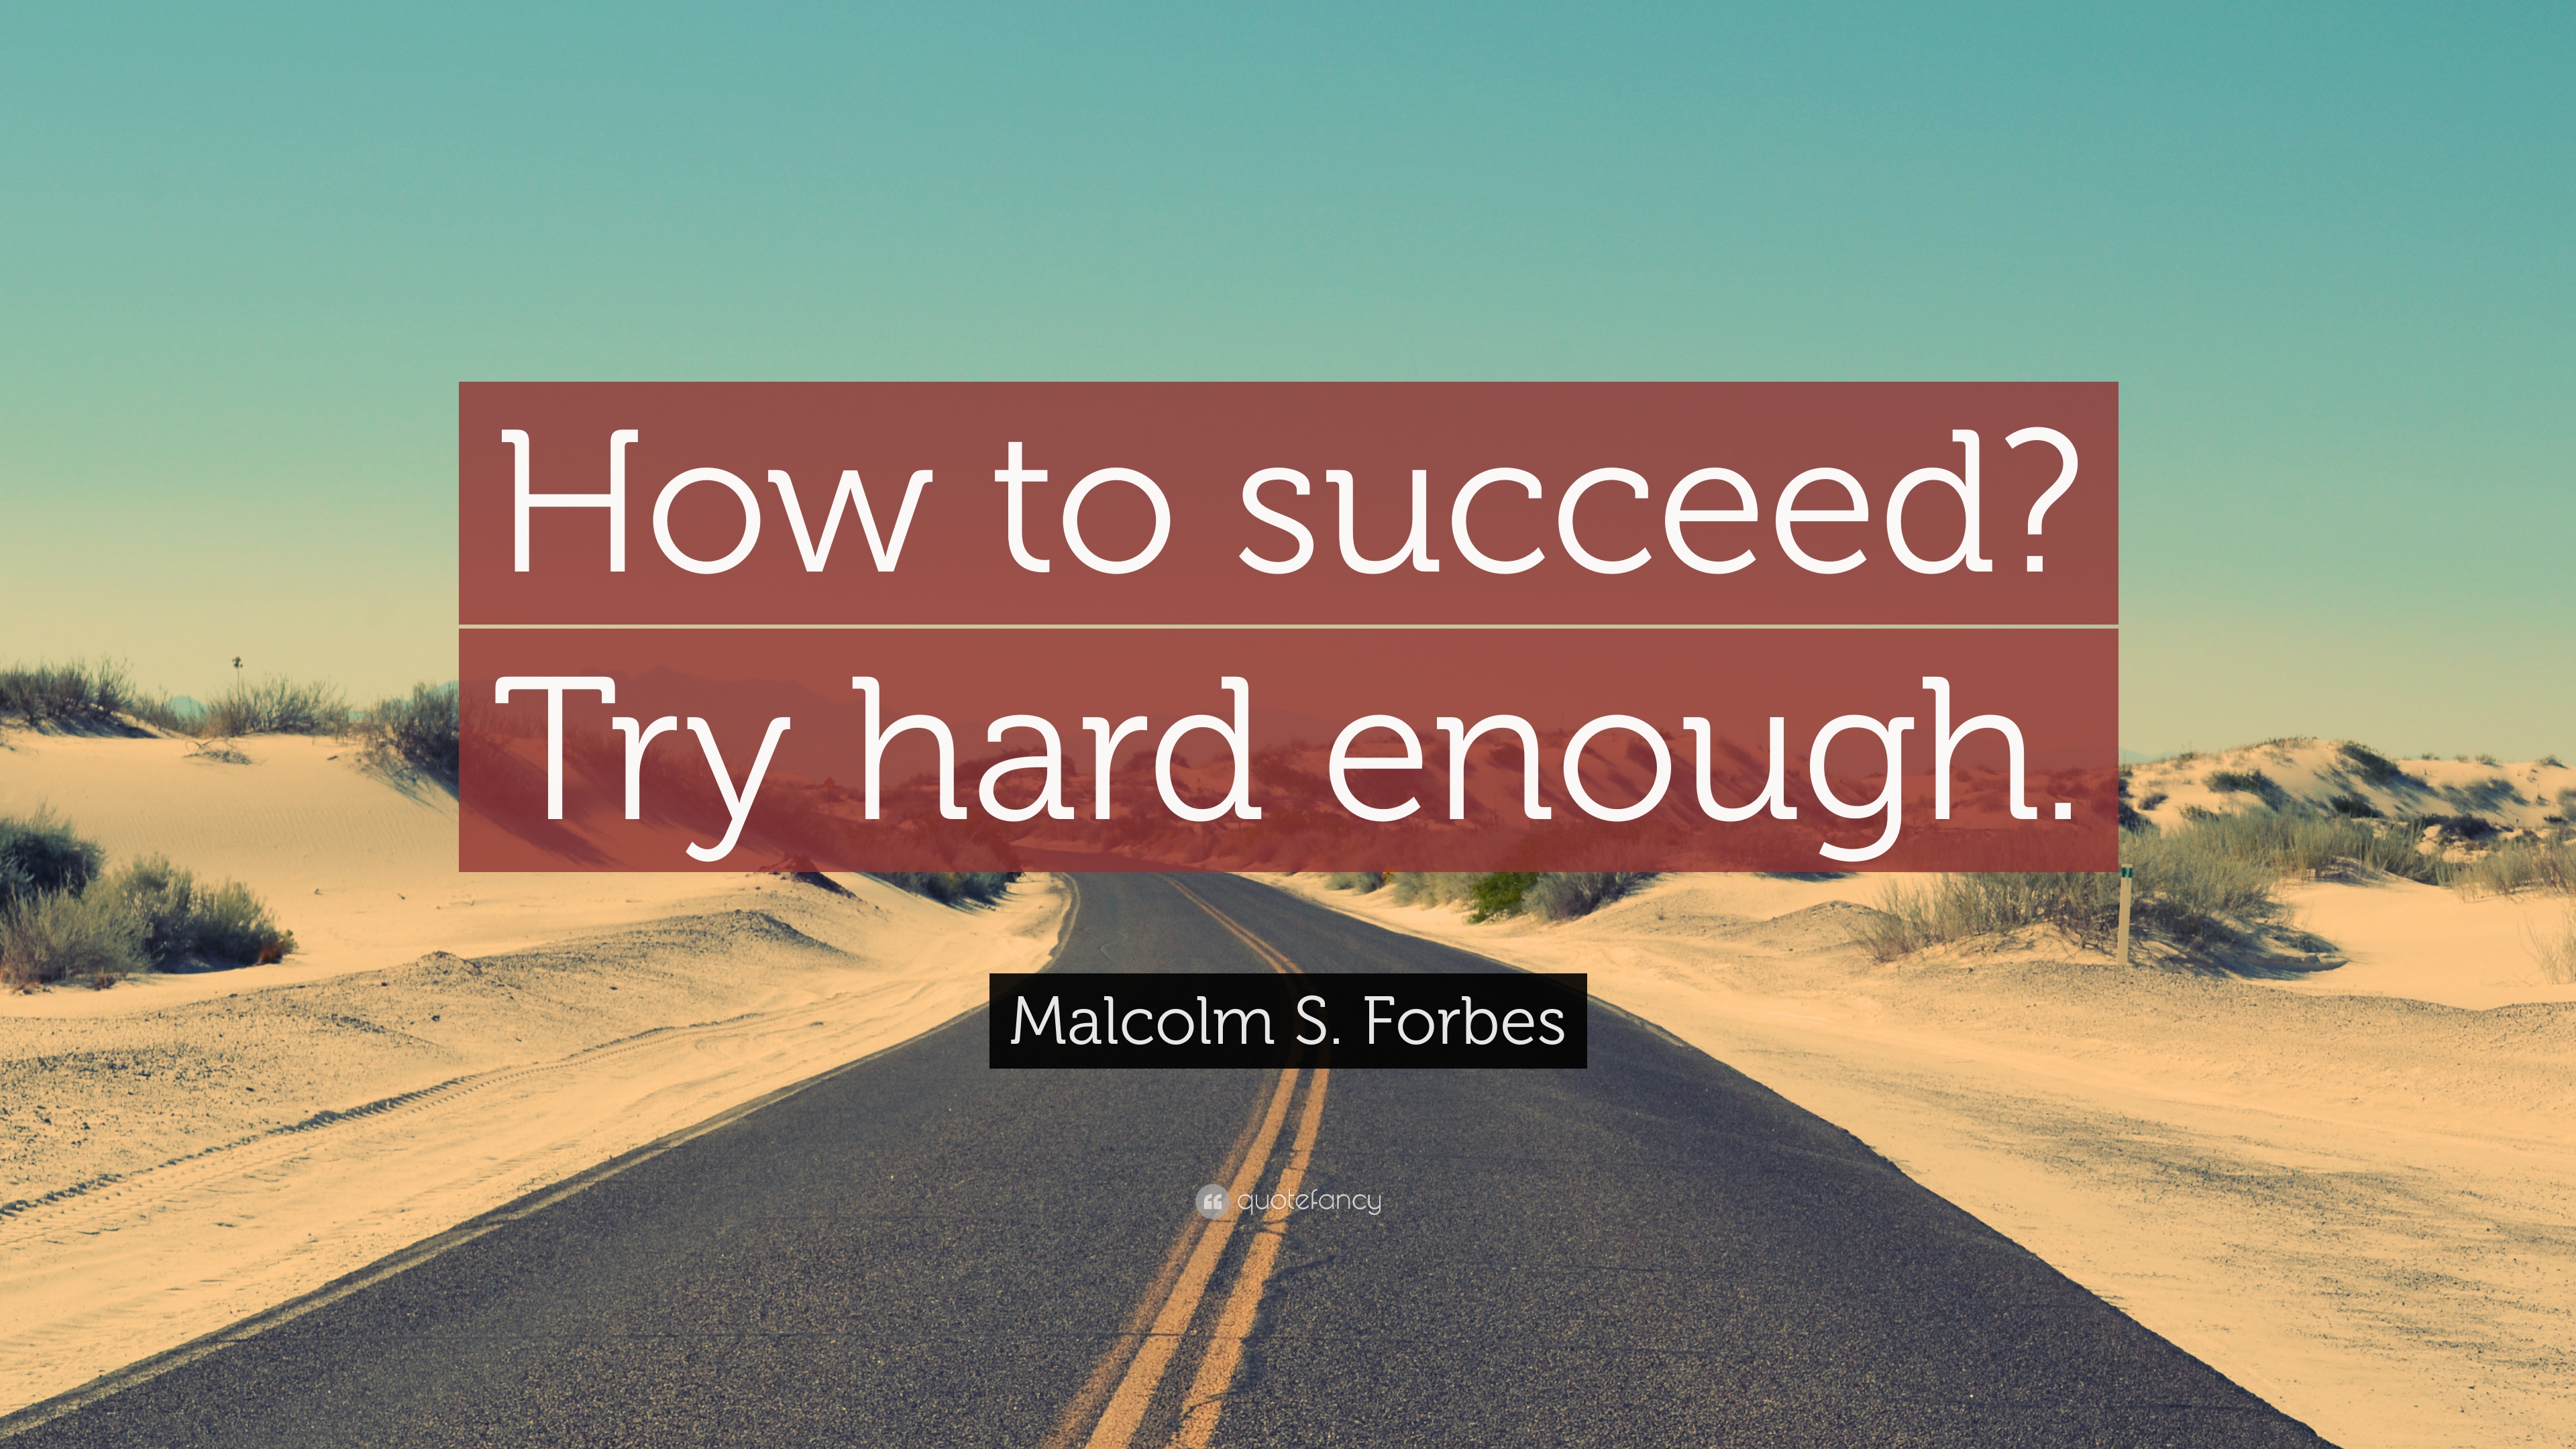 Malcolm S. Forbes Quote: “How to succeed? Try hard enough.” 9